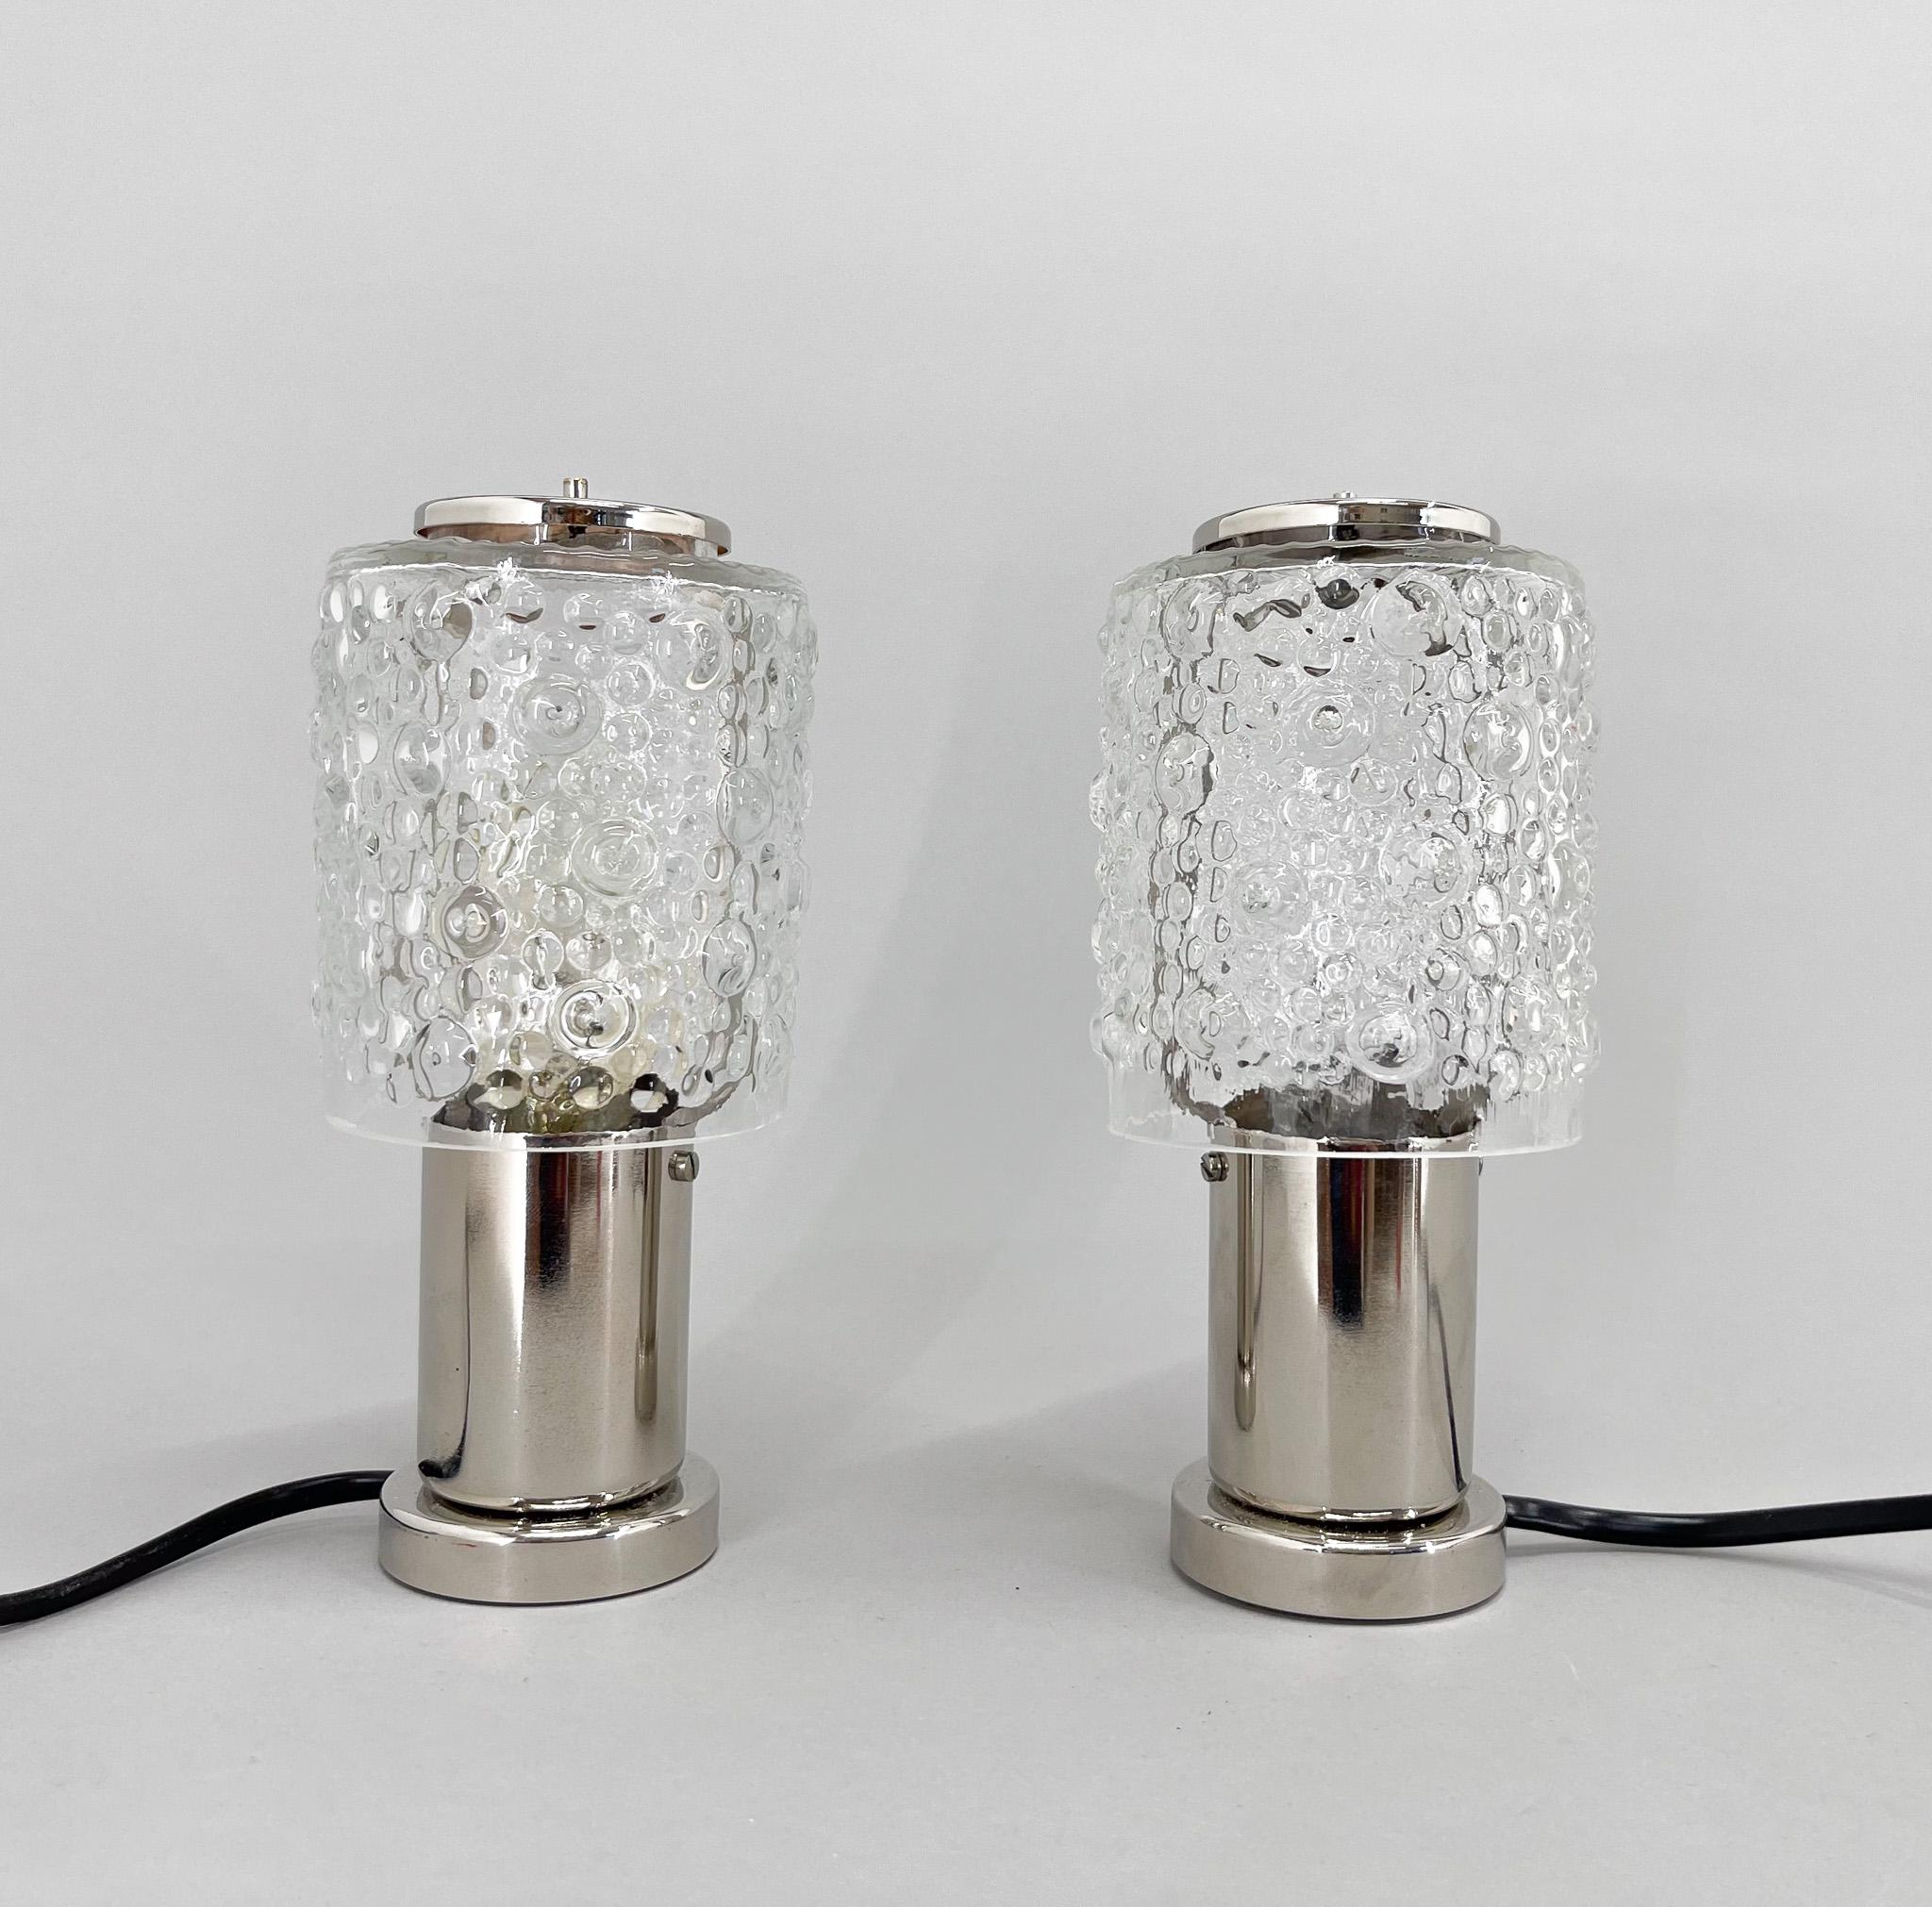 Set of two small table or bedside lamps by famous Kamenicky Senov Glassworks. Produced in former Czechoslovakia in the 1960's. 
The lamps were restored and rewired. 
Bulb: 2x1 E14-E15 bulbs. US plug adapter included.